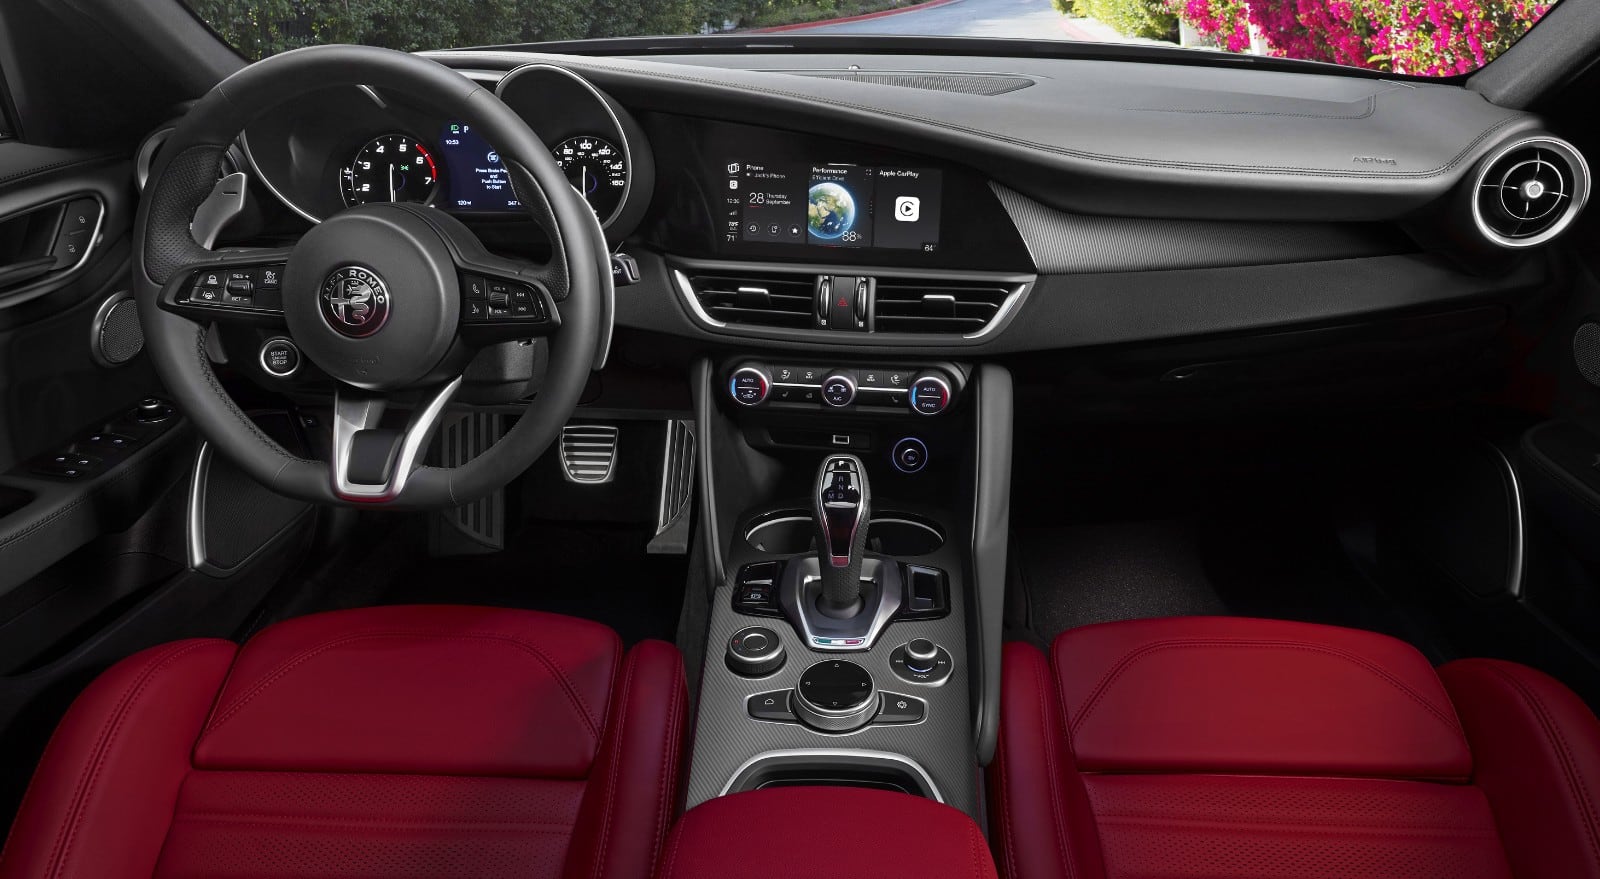 A 360-degree view of the 2023 Alfa Romeo Giulia interior, beginning with the steering wheet, center stack controls and dash.